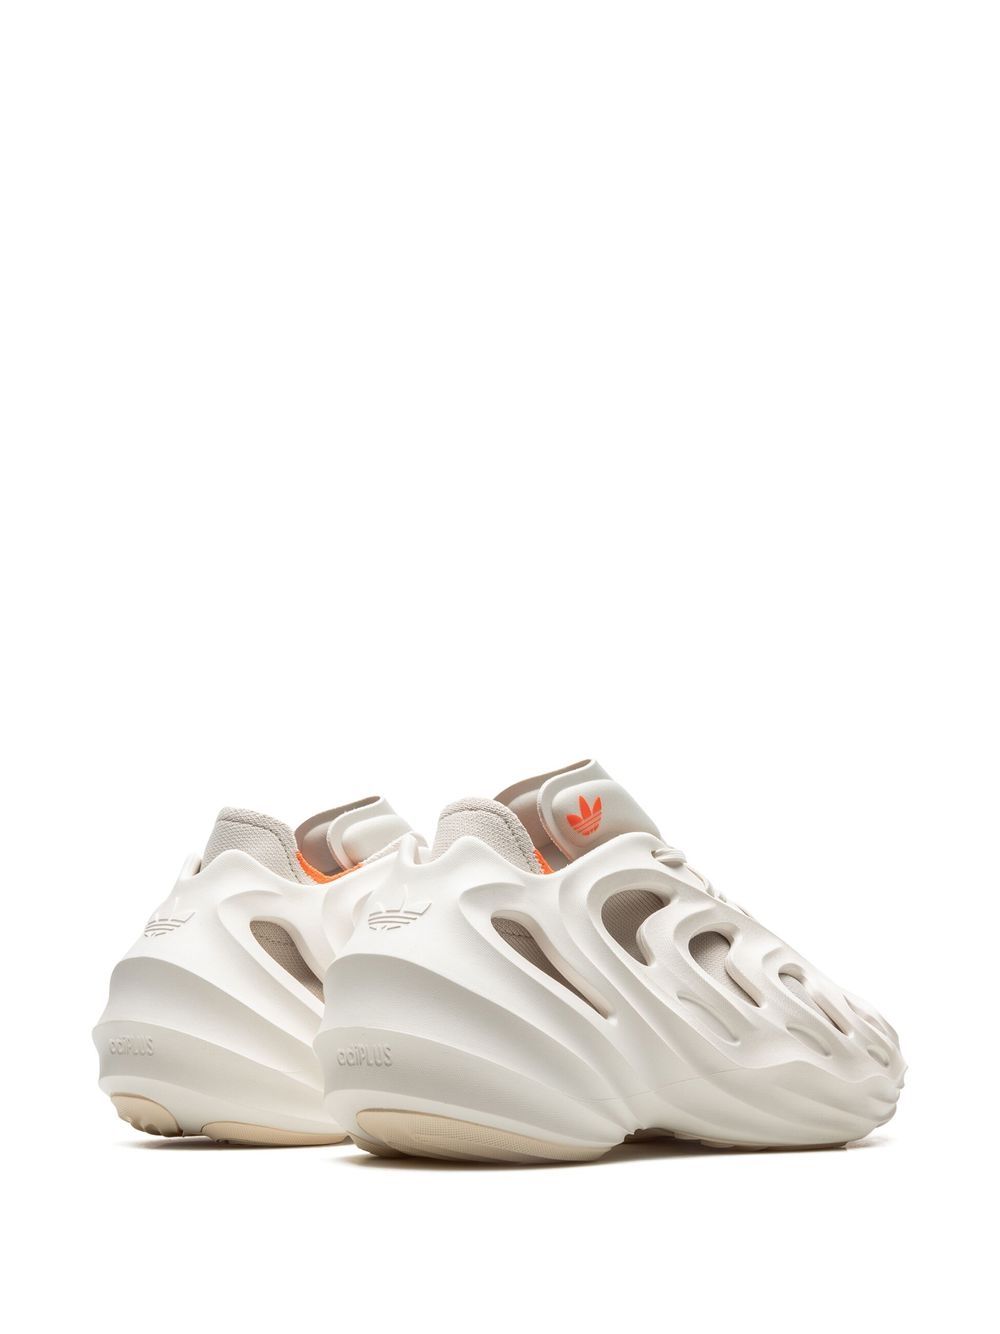 adidas adiFOM Q Off-White GY4455 Release Date